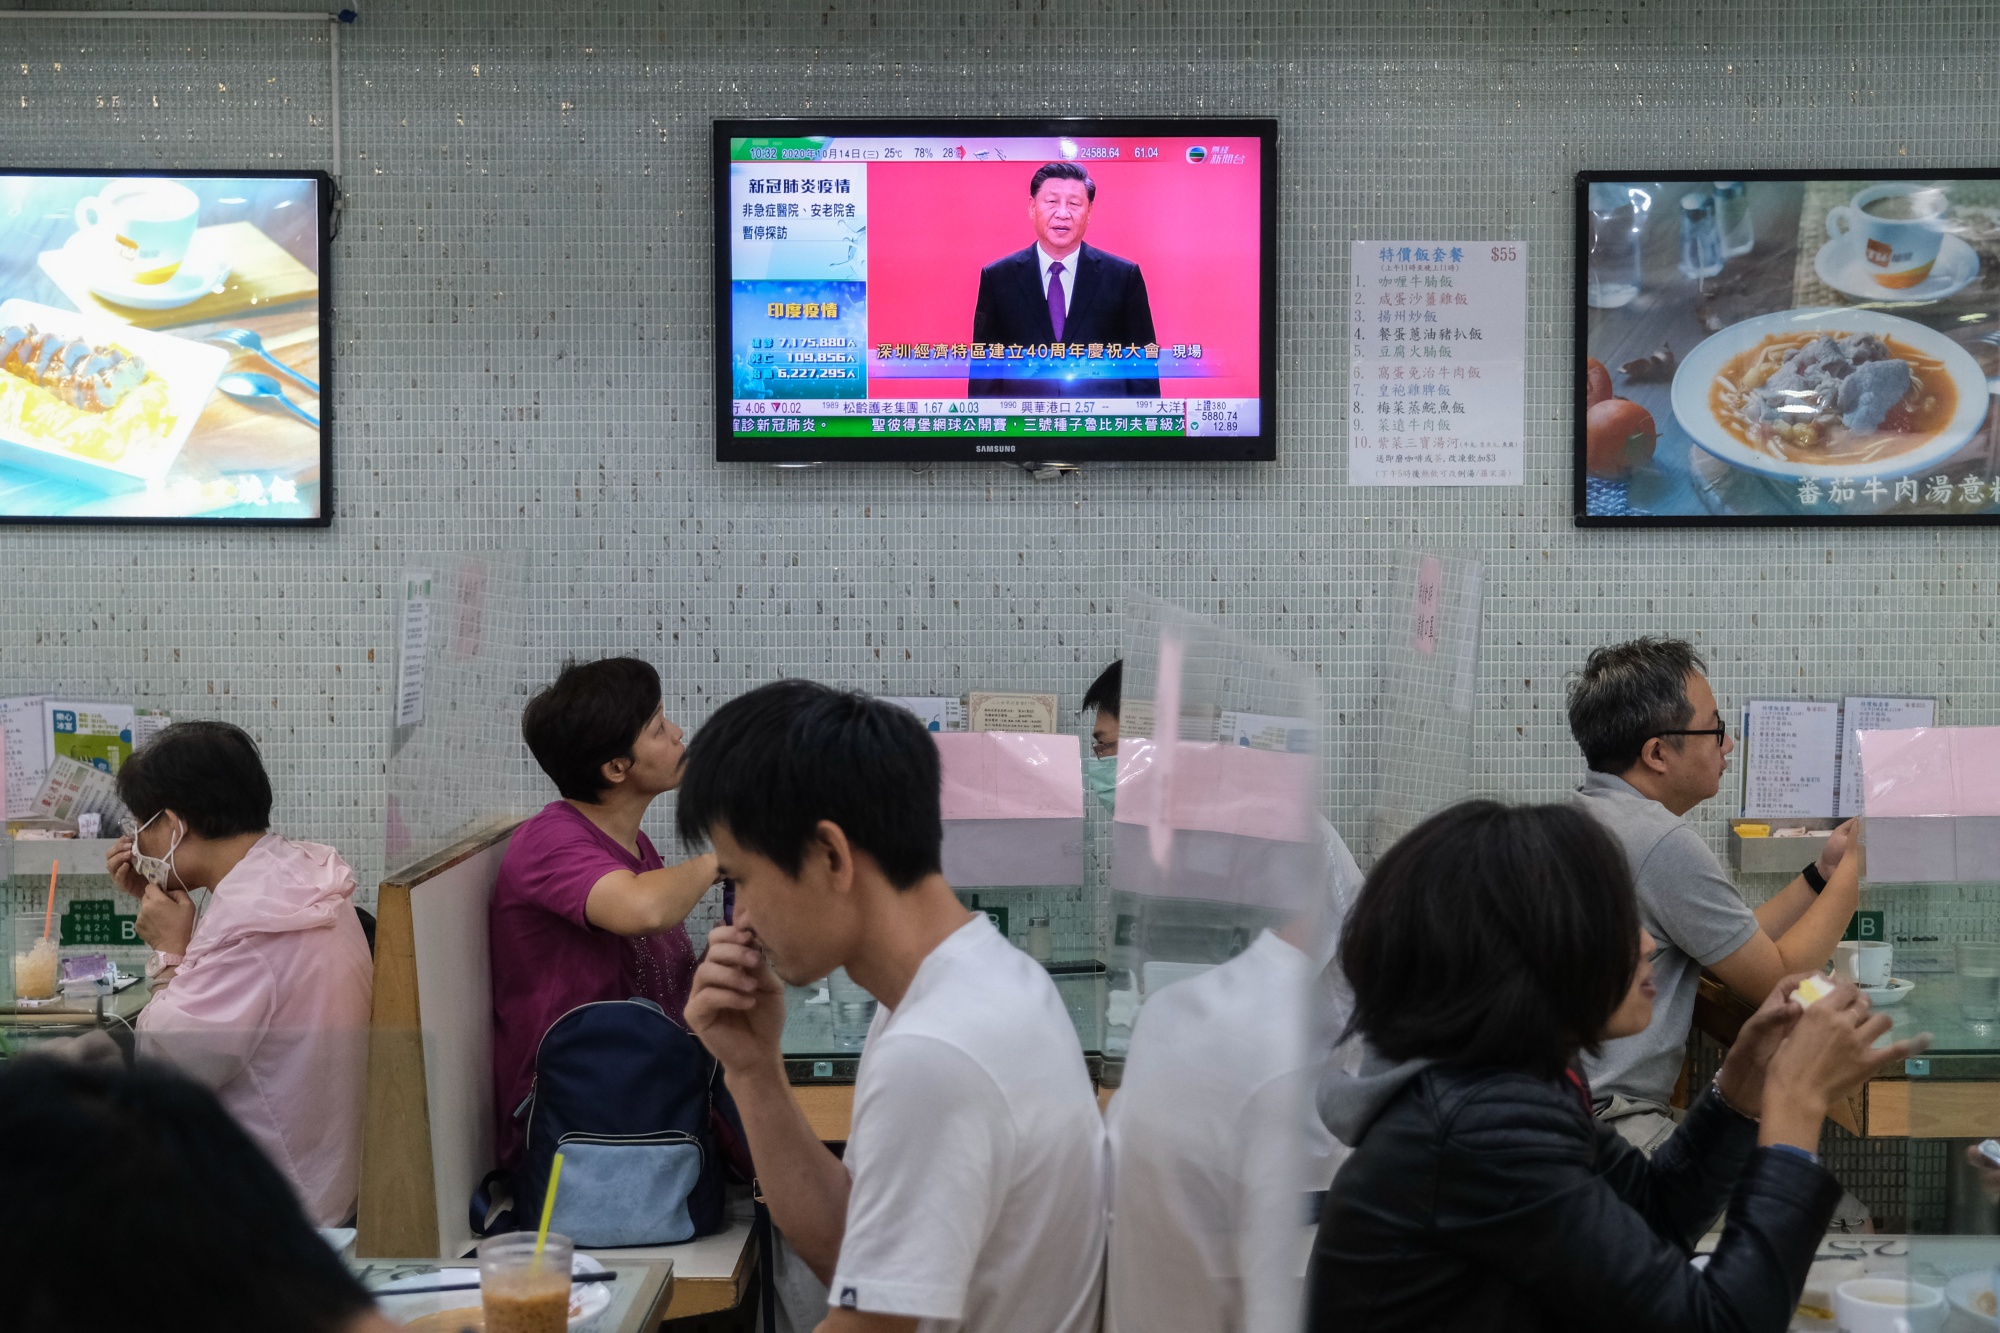 A live broadcast of Xi Jinping delivering a speech in the city of Shenzhen is shown on a screen inside a restaurant in Hong Kong on Oct. 14.